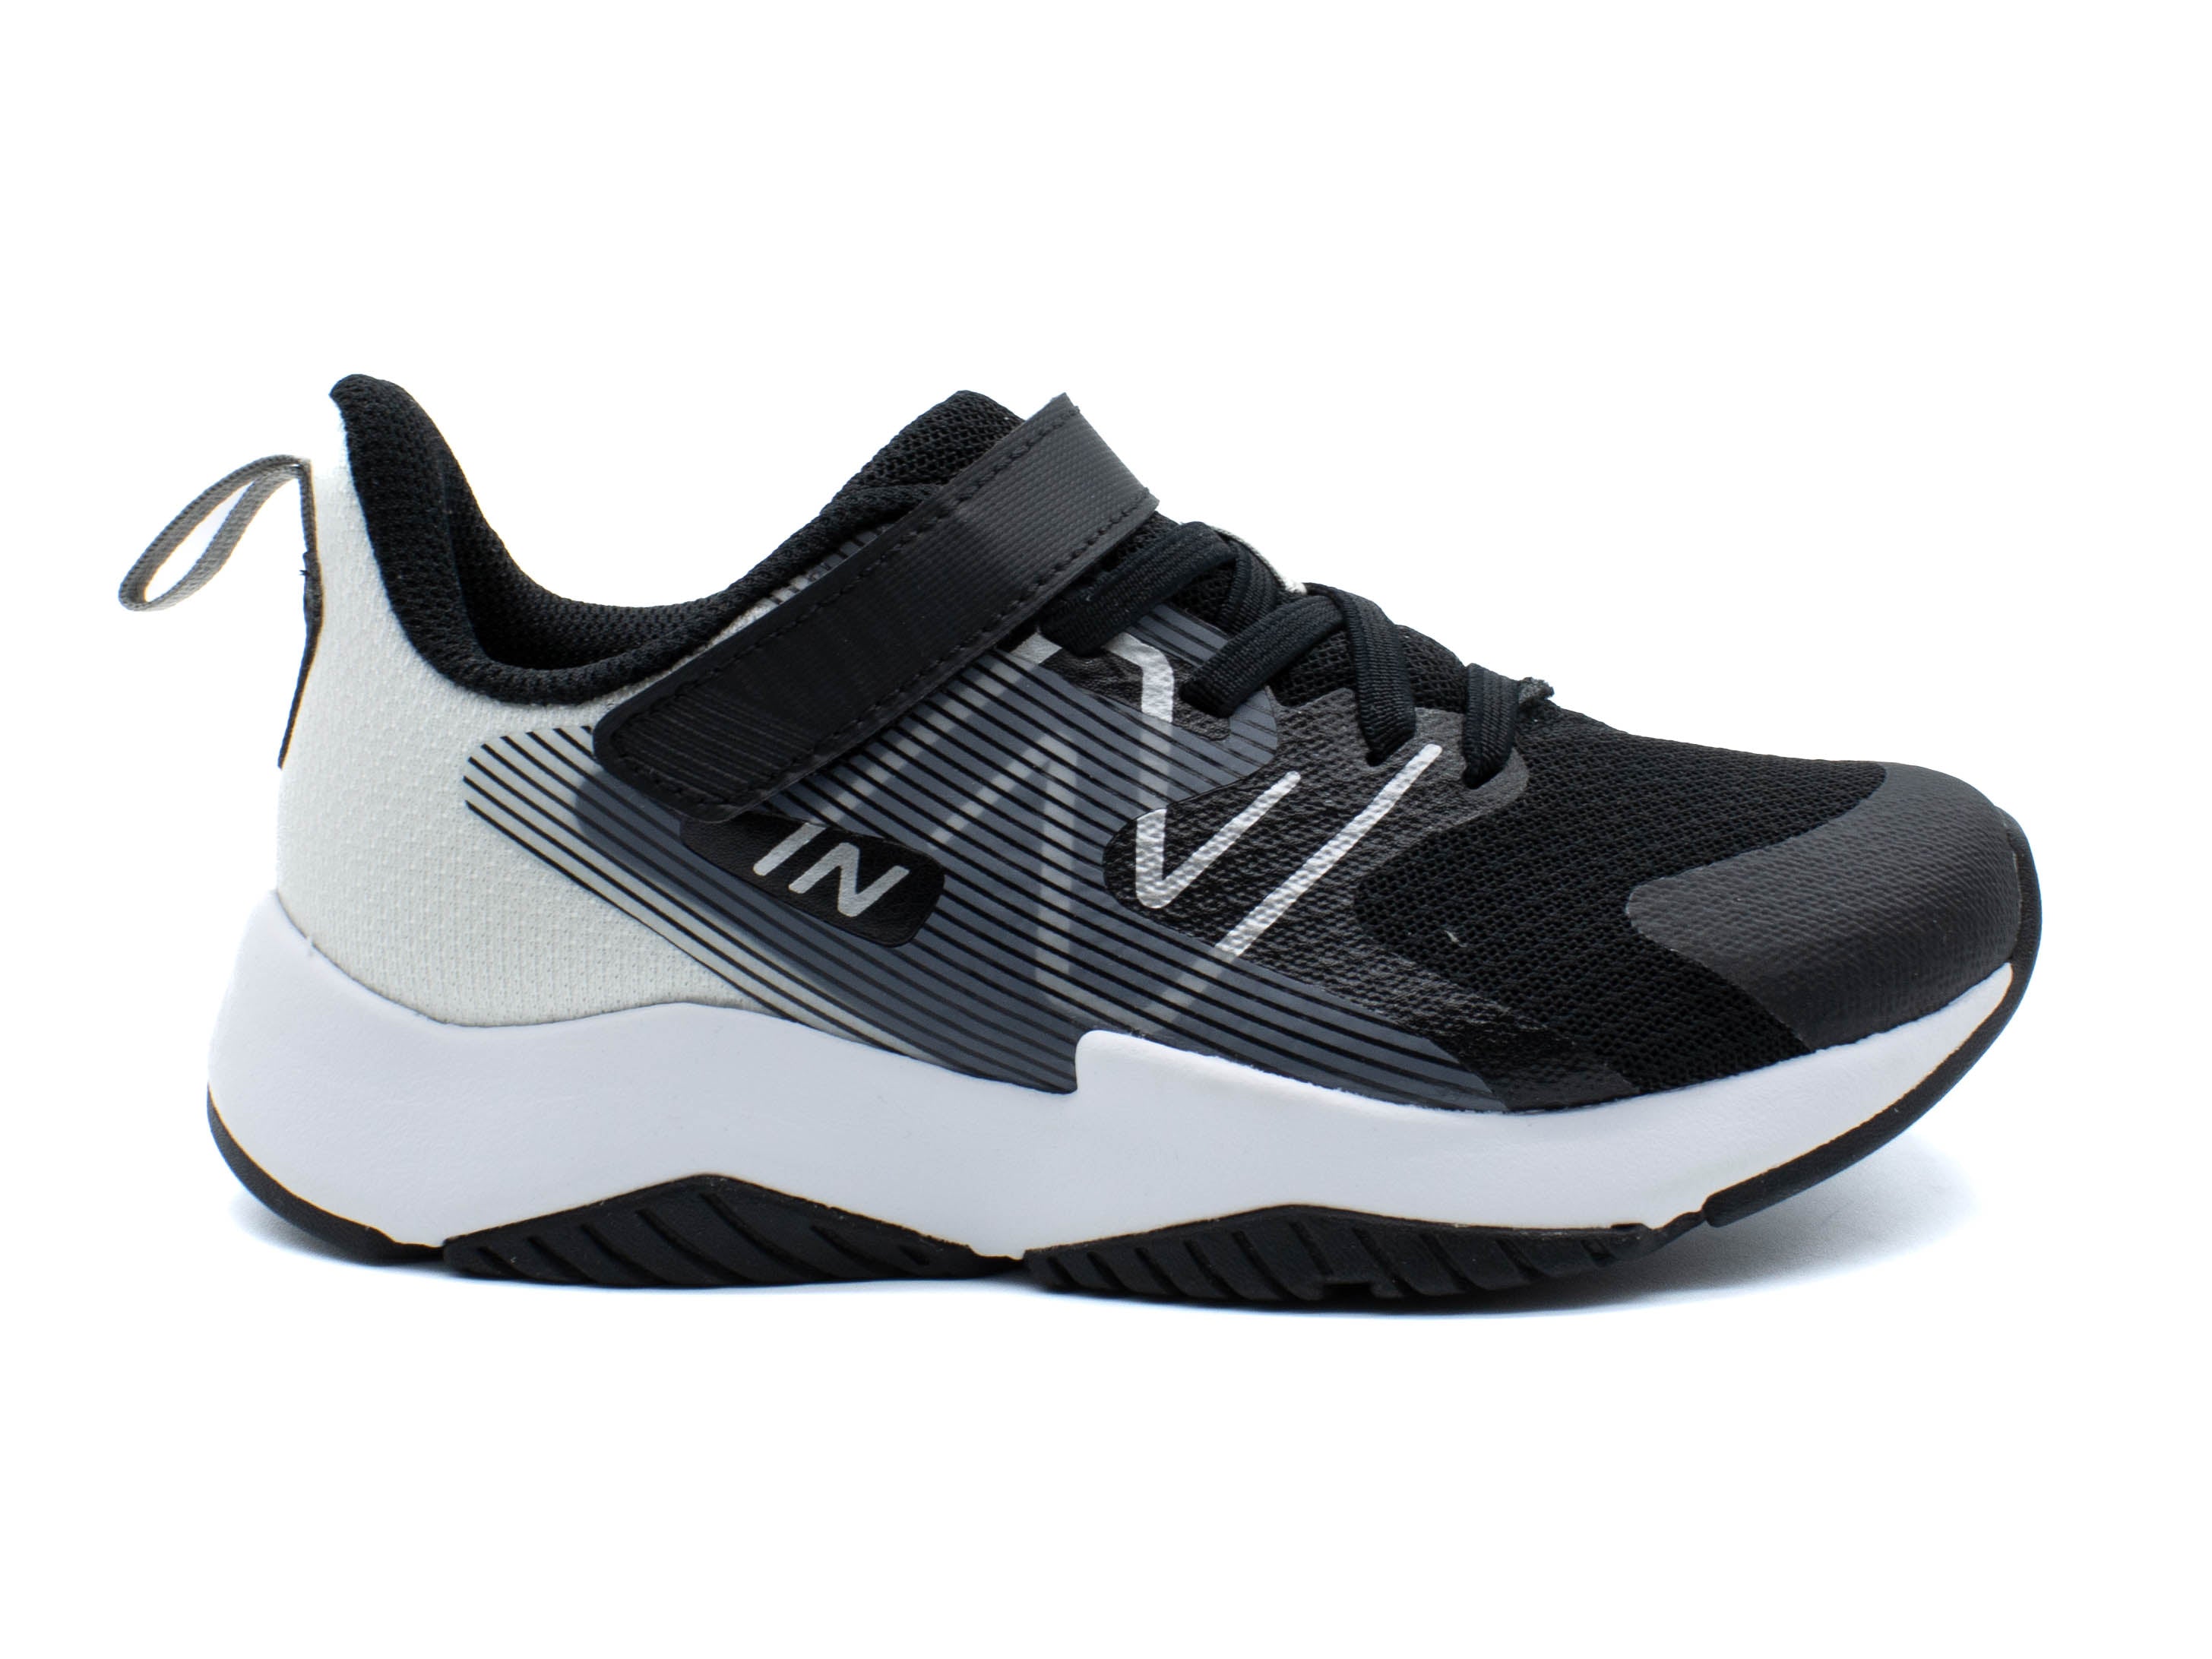 NEW BALANCE Rave Run v2 Bungee Lace with Top Strap